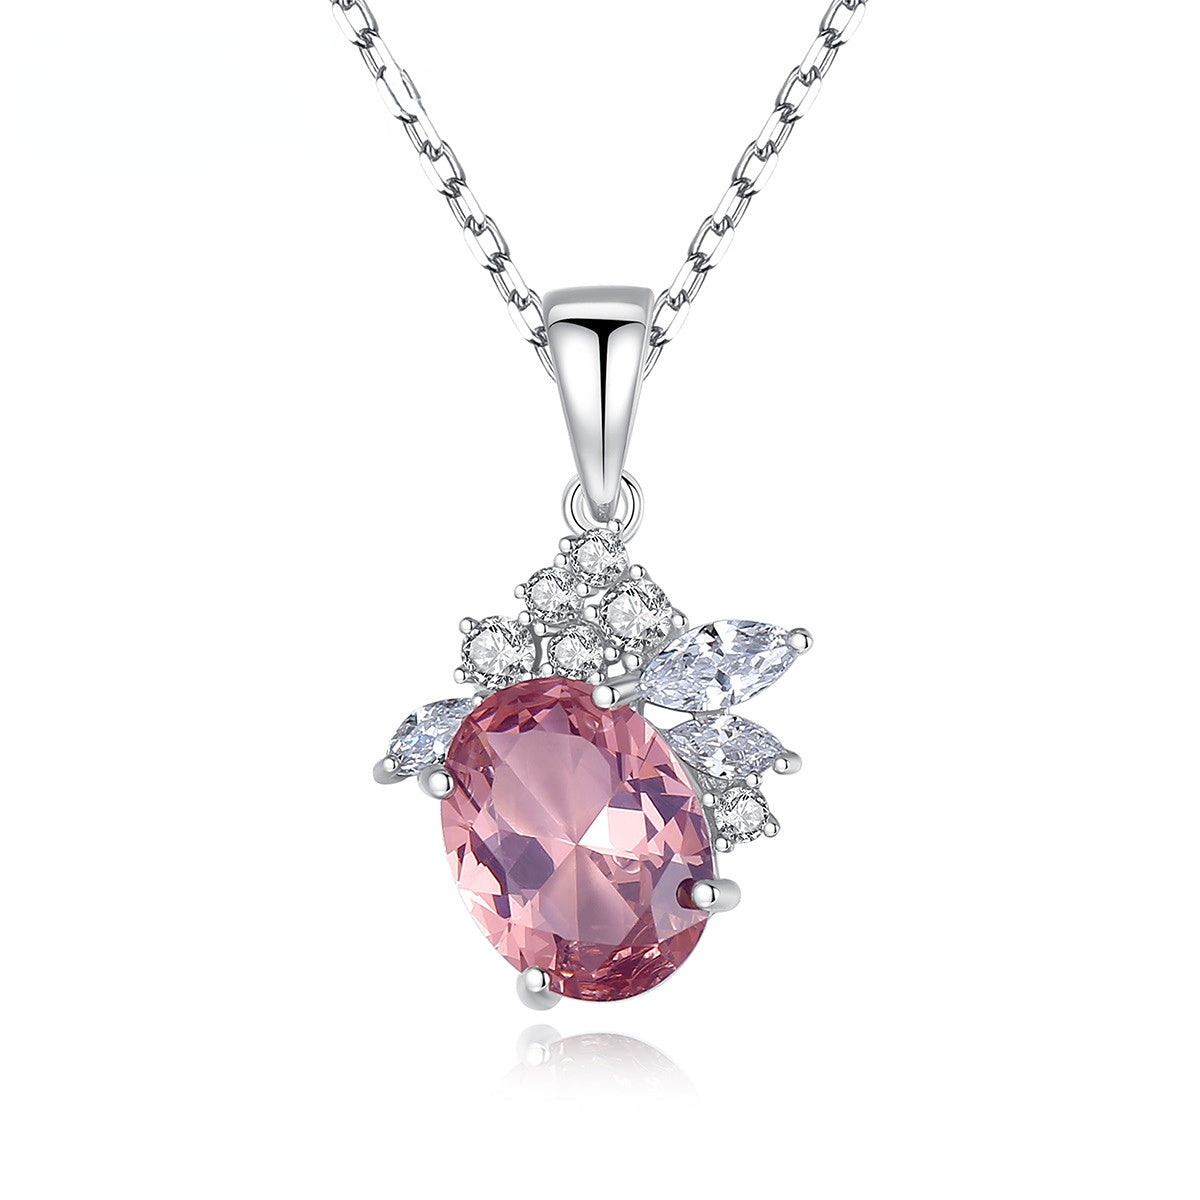 Gemstonely- Minimalist and Elegant: S925 Silver Necklace with Morganite Gemstone Pendant for Women